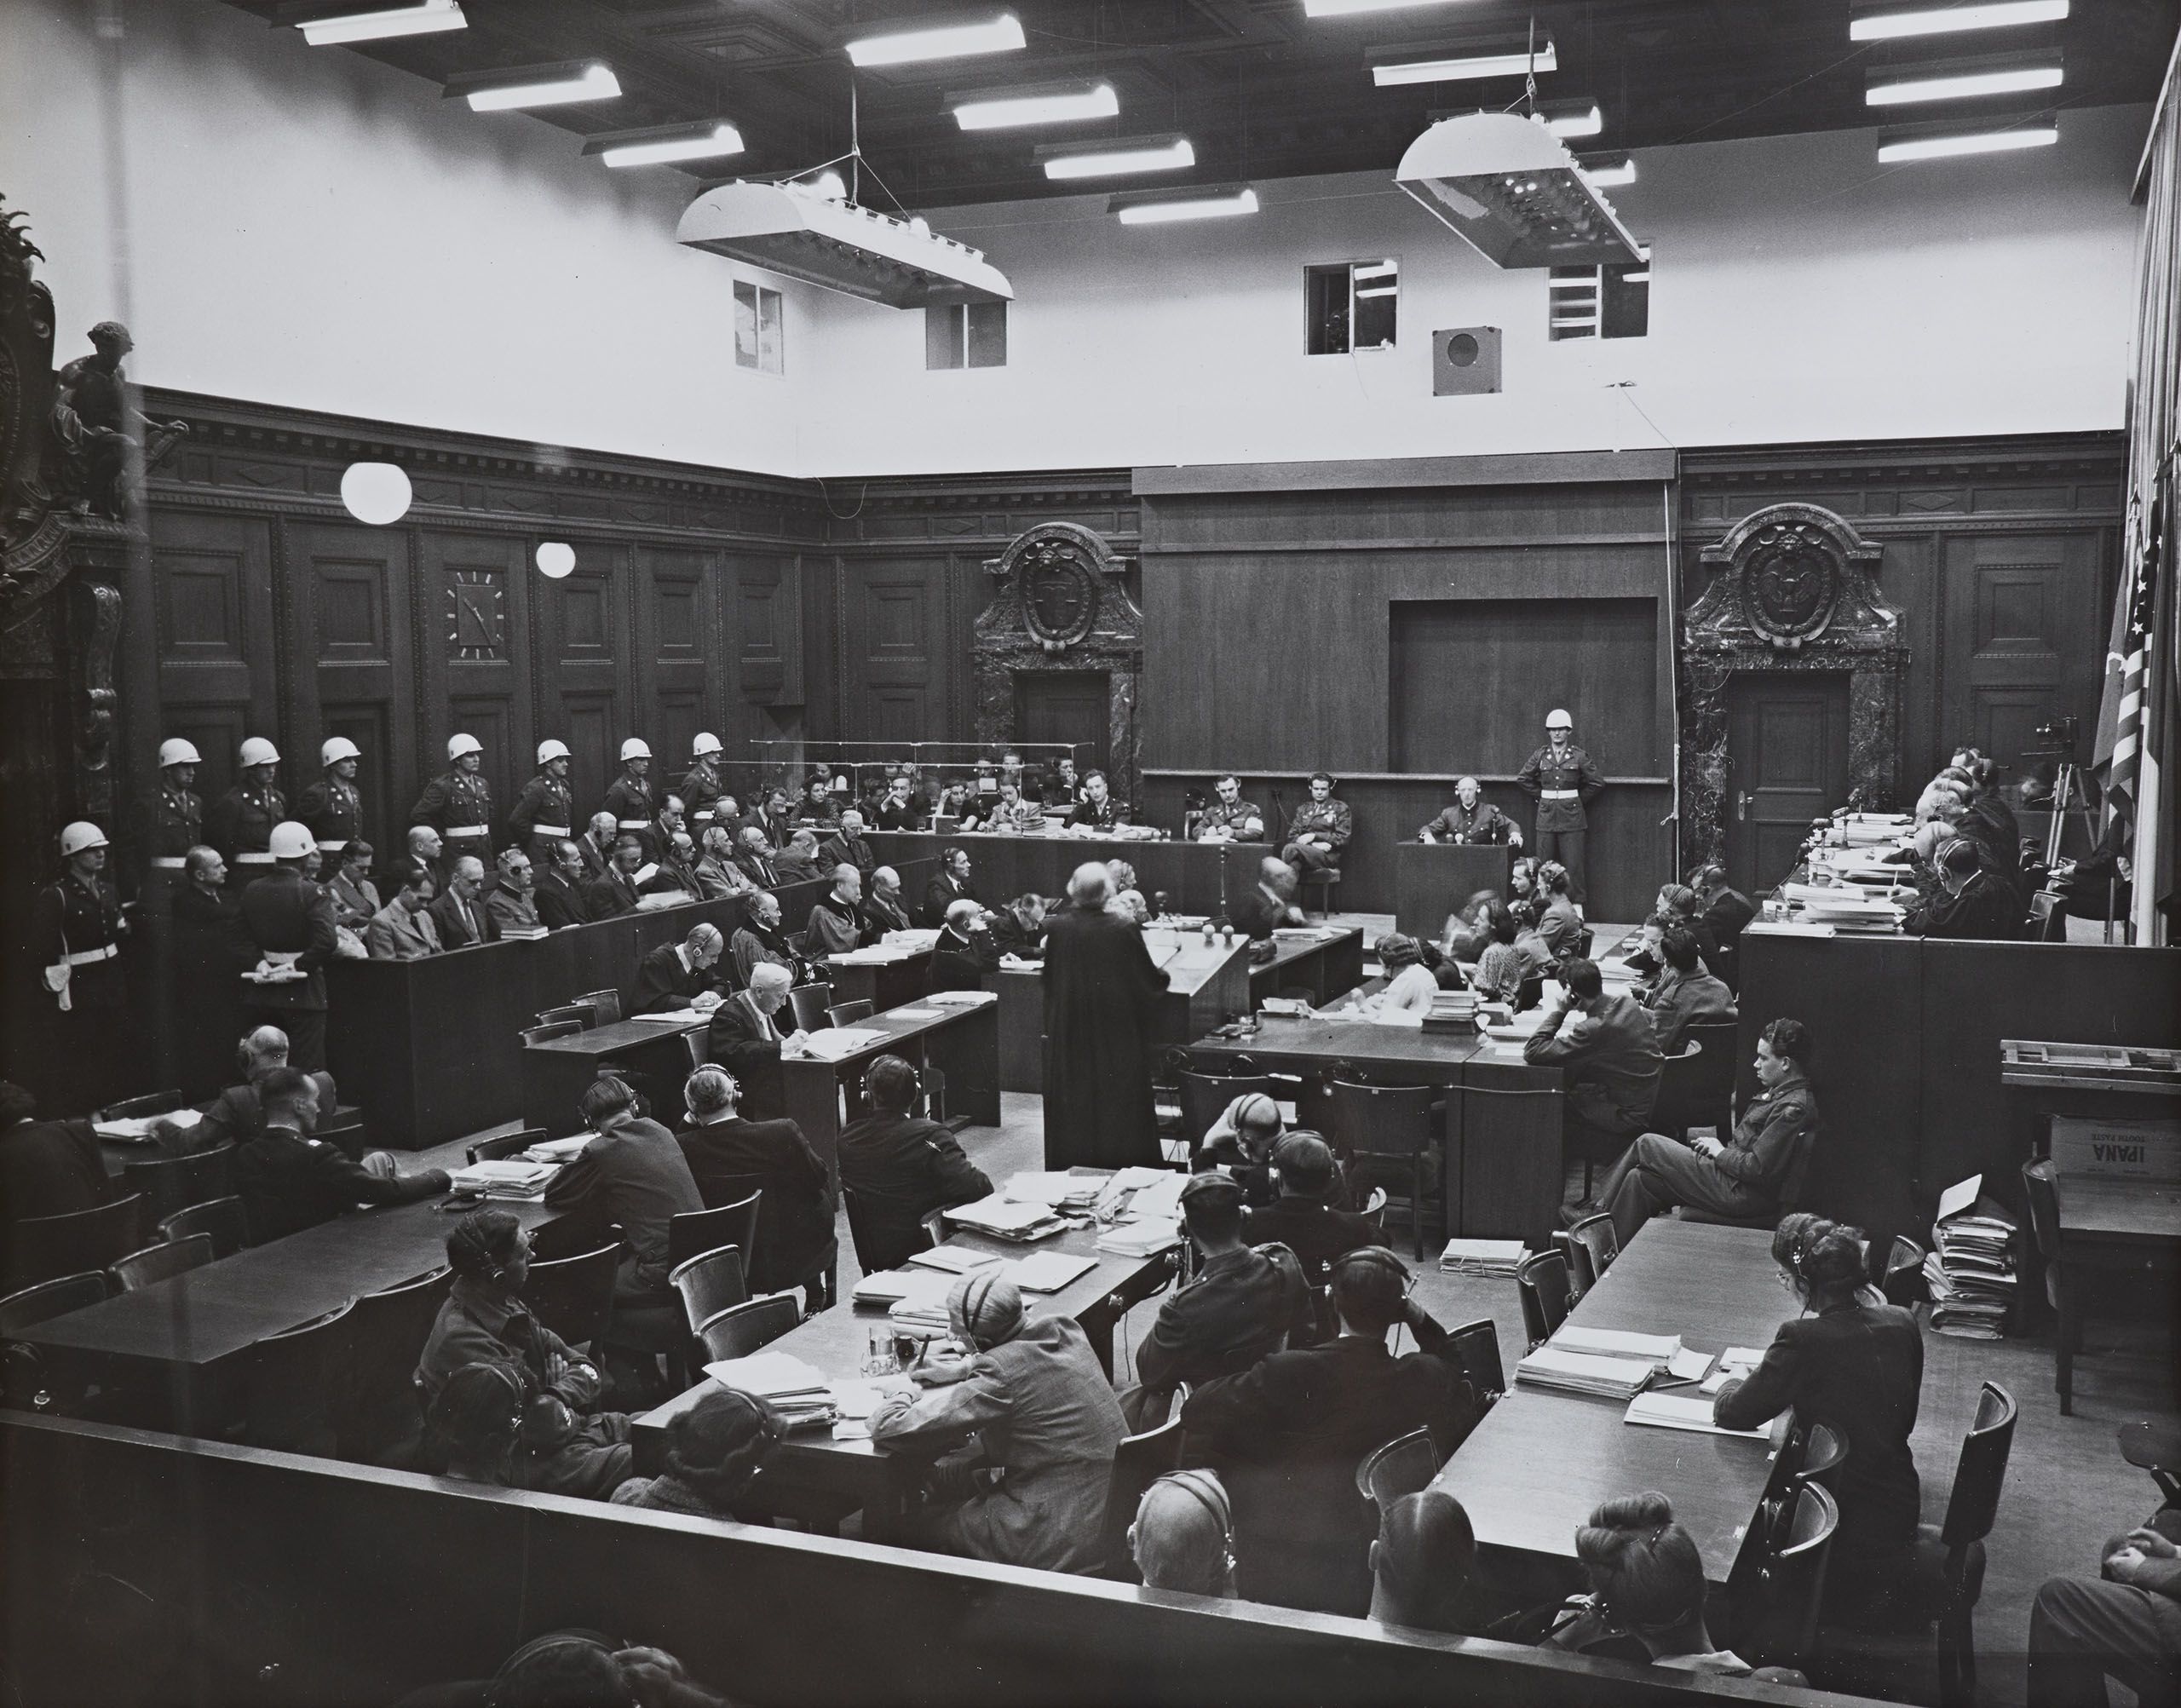 Photograph of Nuremberg trials courtroom scene, circa 1945-1946. From the Hertha Knuth Miscellany, Hoover Institution Archives.